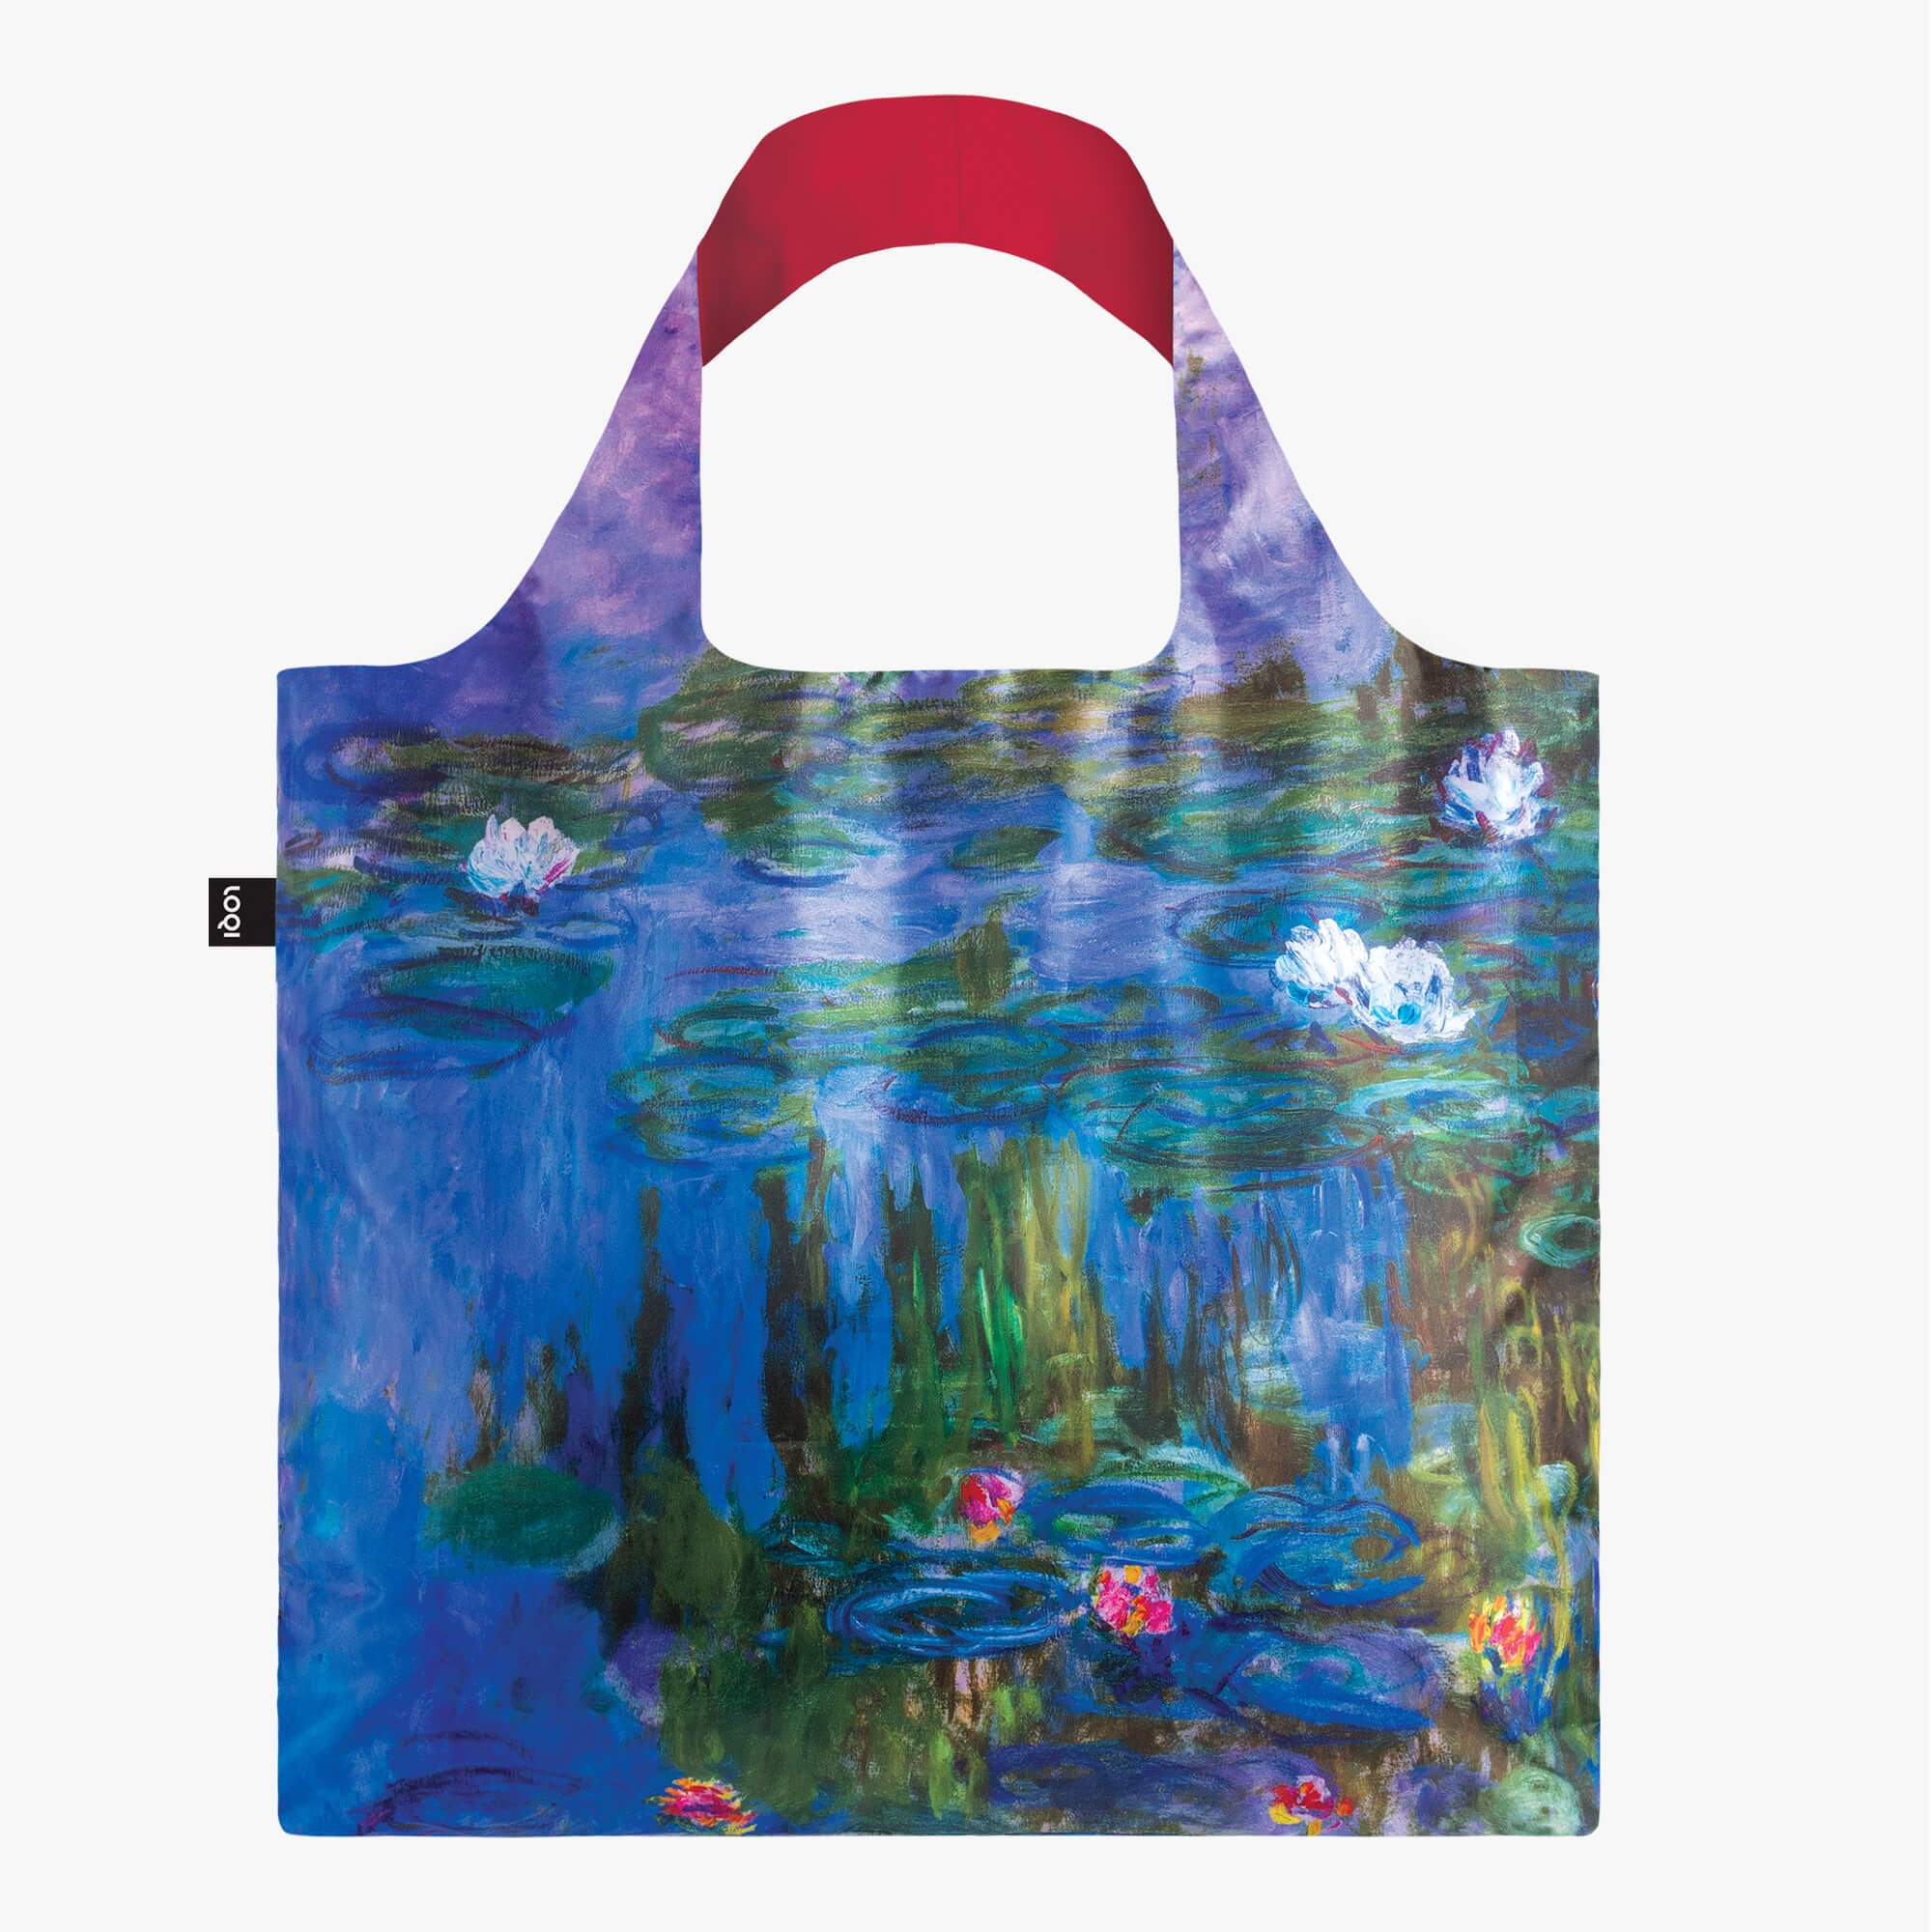 Sustainable Living Loqi Monet Recycled Bag by Weirs of Baggot Street